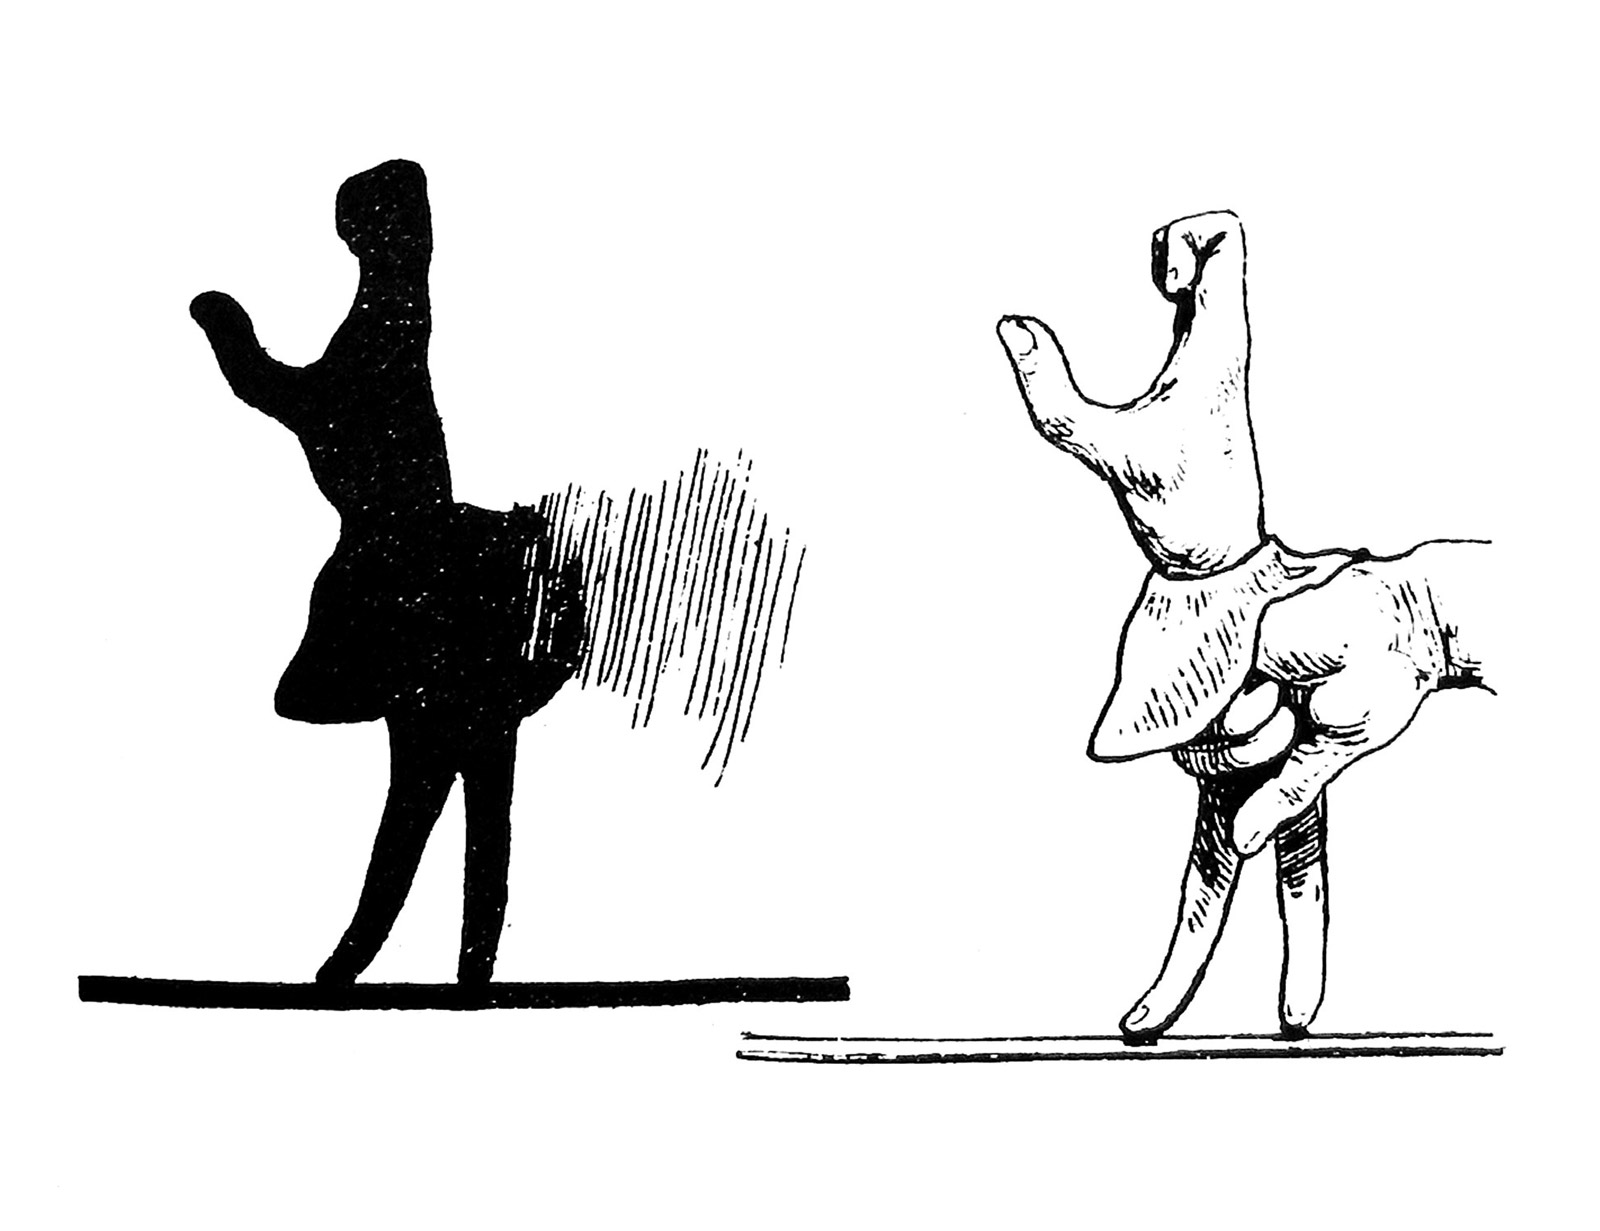 The front of this issue’s postcard featuring two illustrations explaining how to make a ballerina shadow figure.